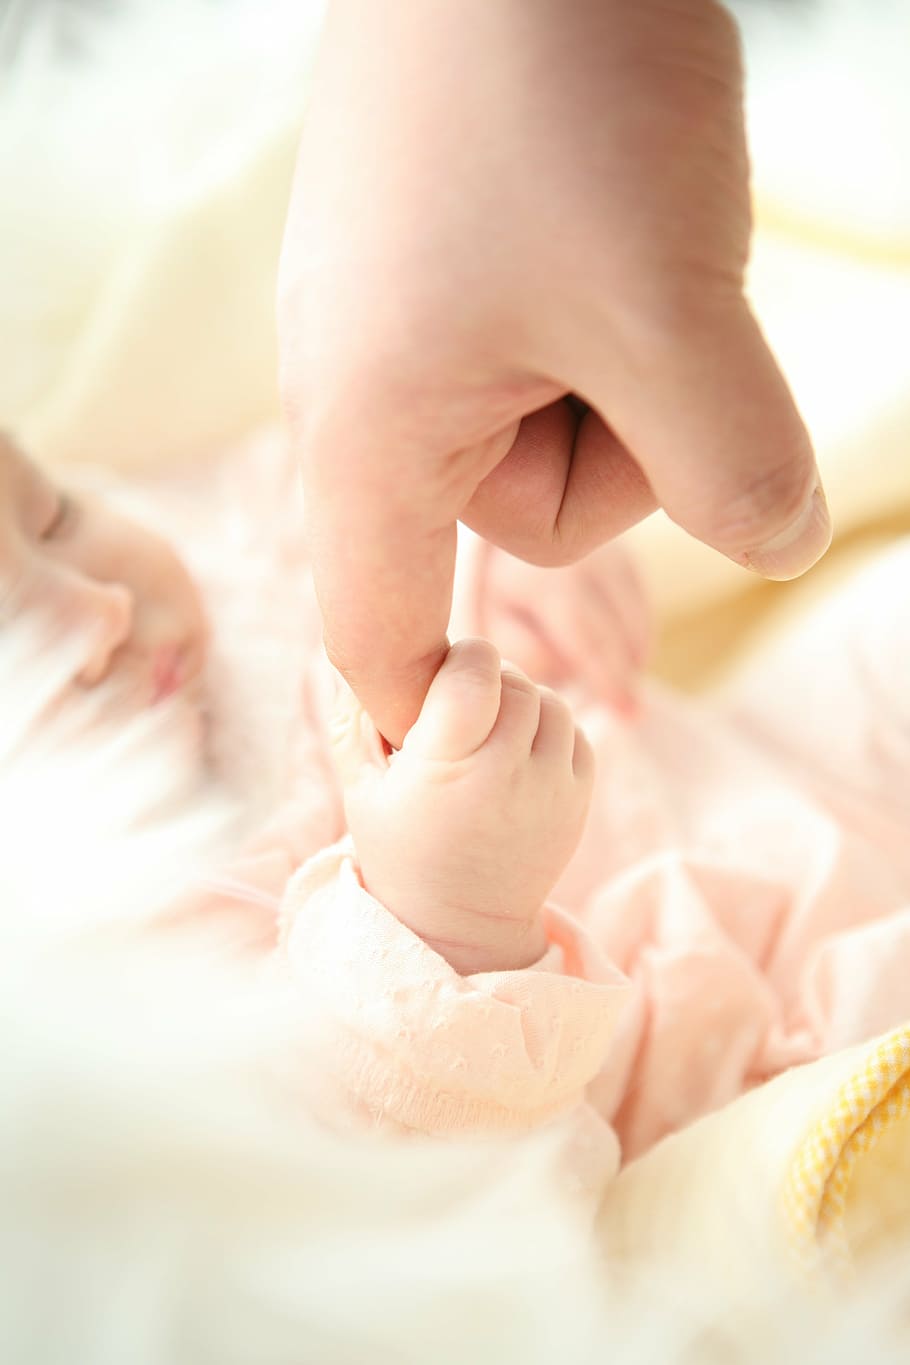 baby holding index finger of person, hand, dad, child, human Hand